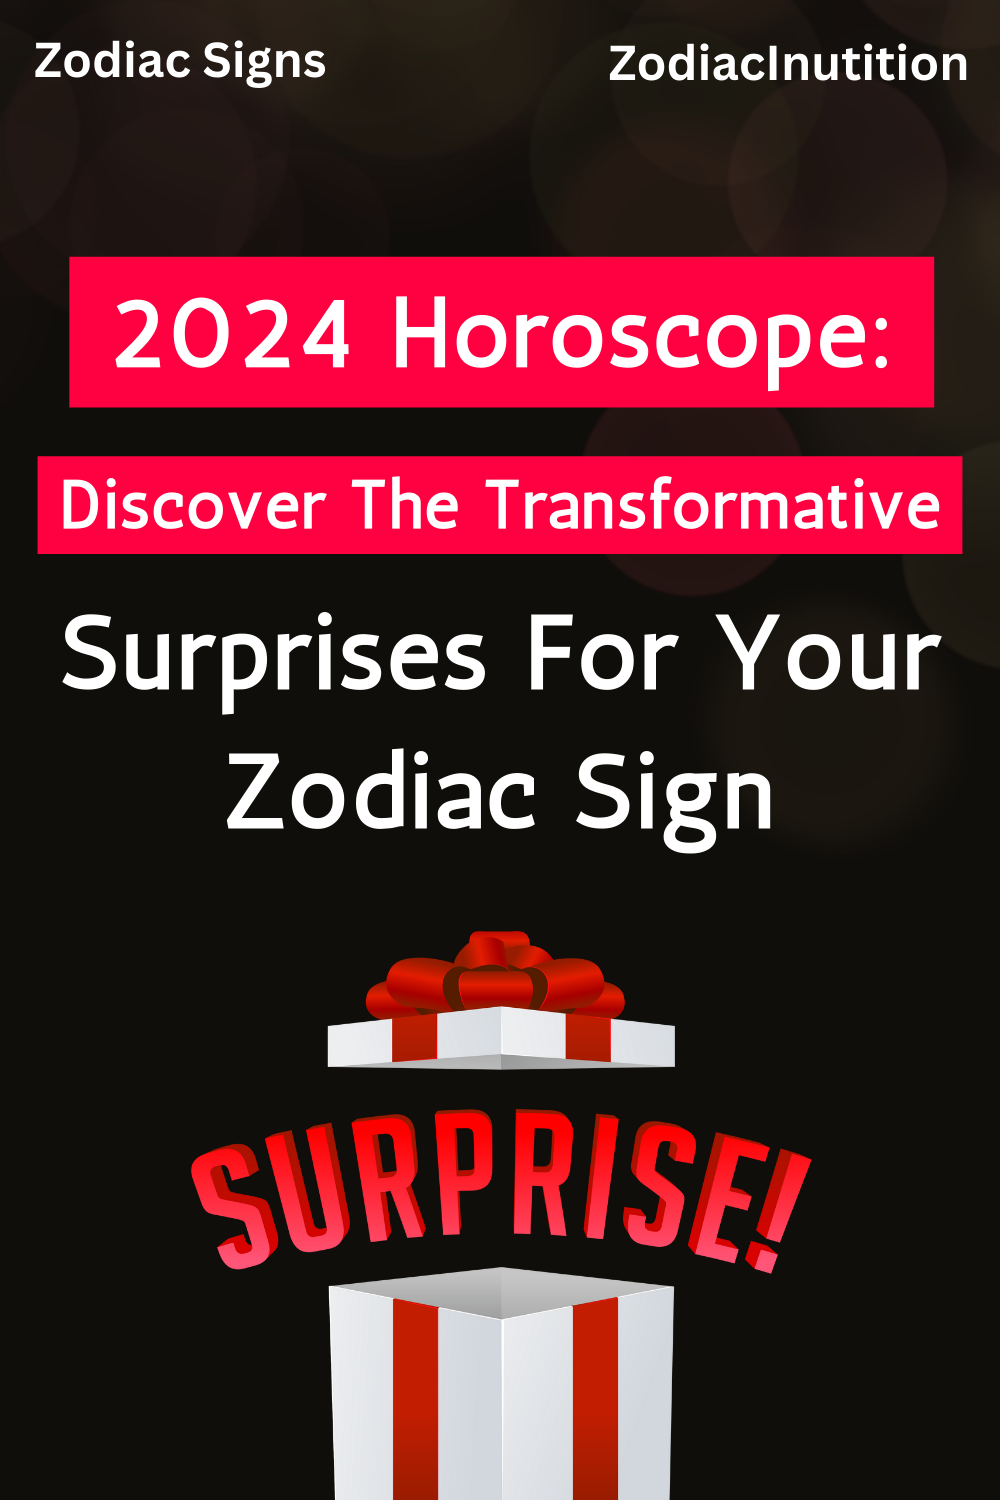 2024 Horoscope: Discover The Transformative Surprises For Your Zodiac Sign